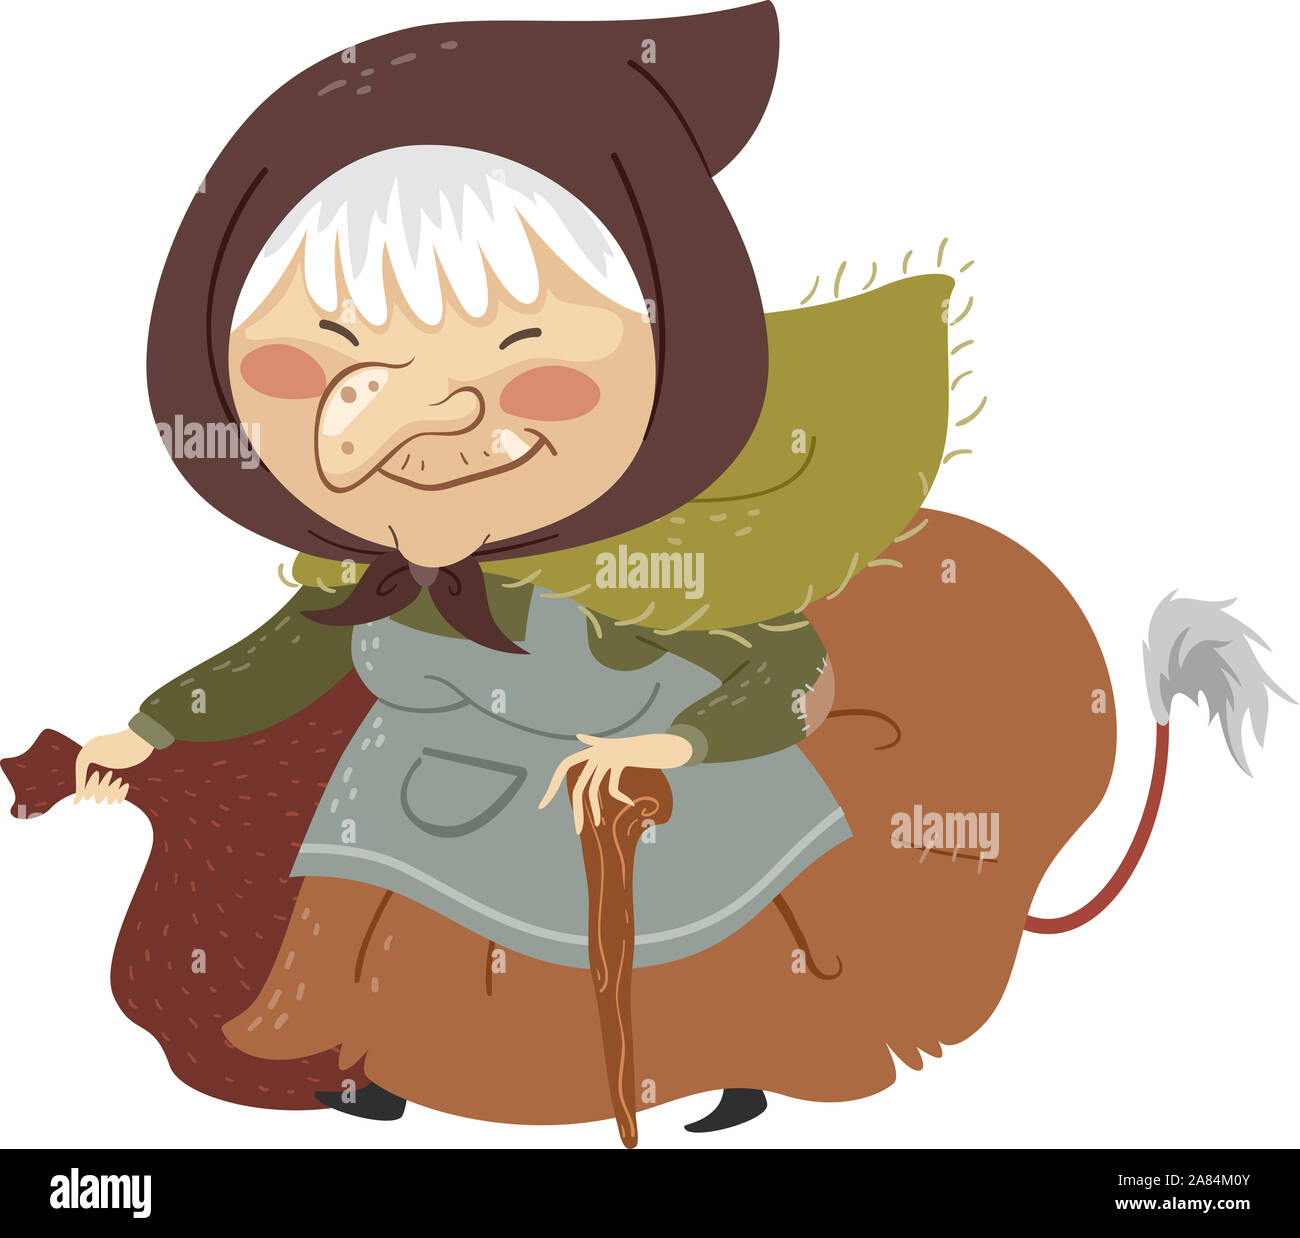 Illustration of Icelandic Christmas Cannibal Gryla with Long Nose and Tail Wearing Old Headscarf Holding a Sack Bag and Using Walking Stick to Walk Stock Photo